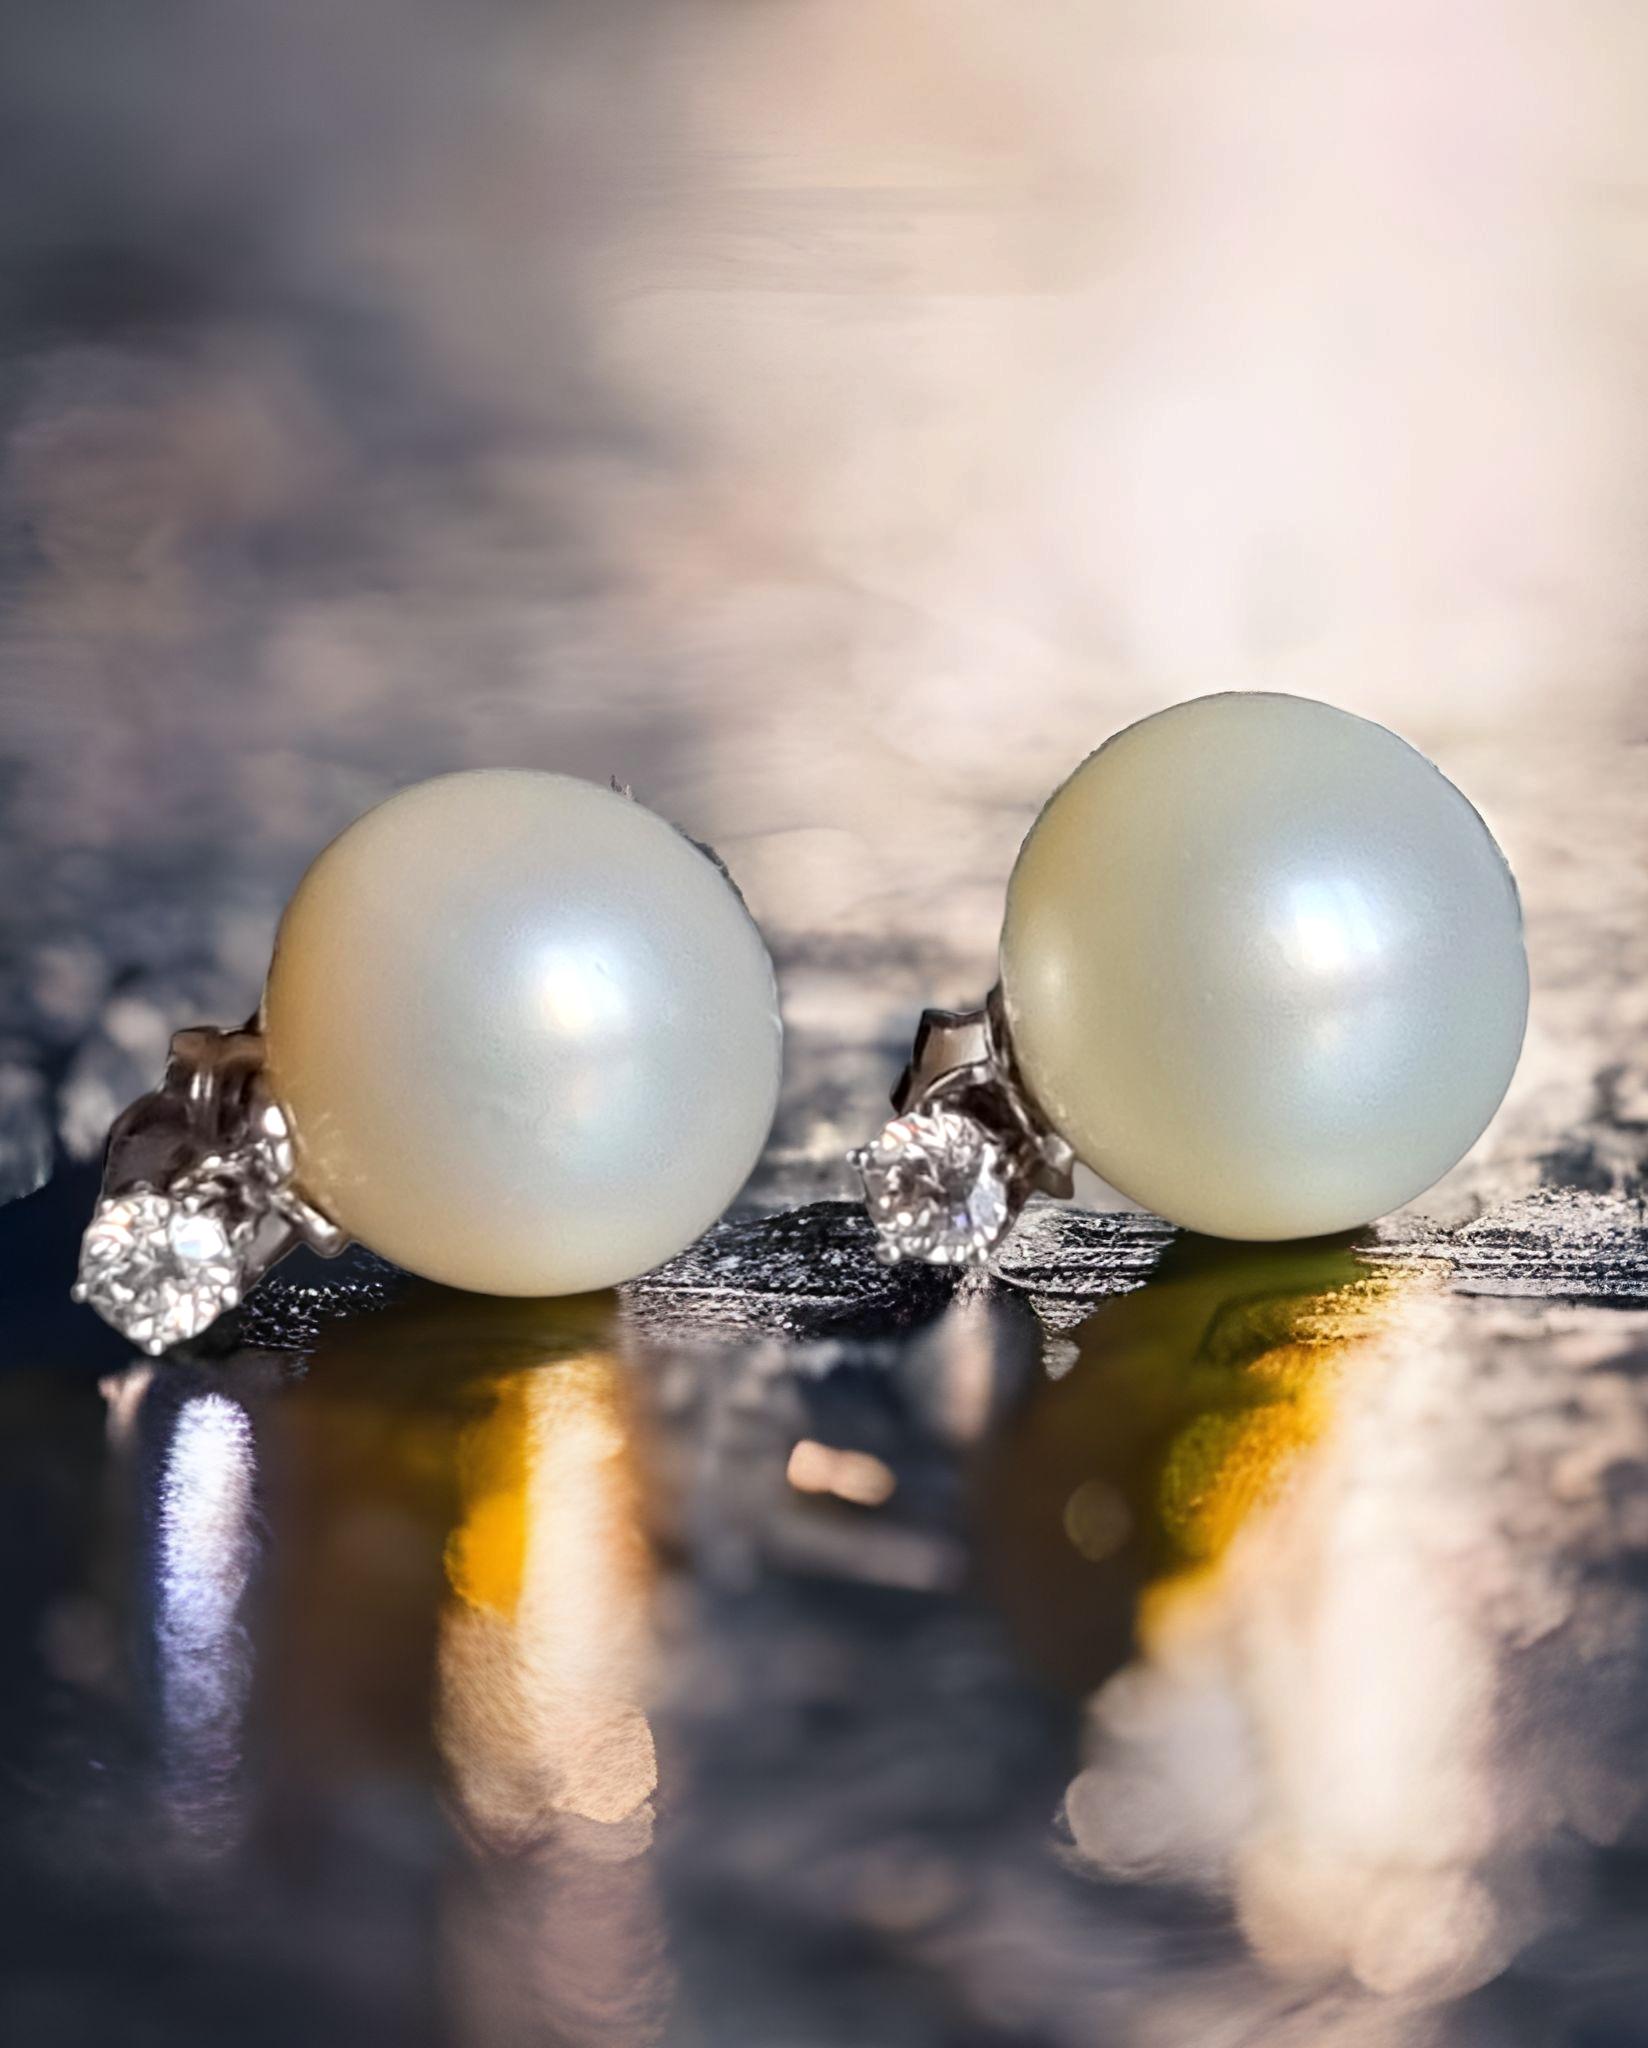 South Sea Pearls and Diamond  Dangle Earrings
These exquisite pearl earrings feature two 12.35 and 12.55mm AAA Quality White South Sea cultured pearls, displaying an incredible luster and white-creamy overtones. The pearls are mounted on the finest